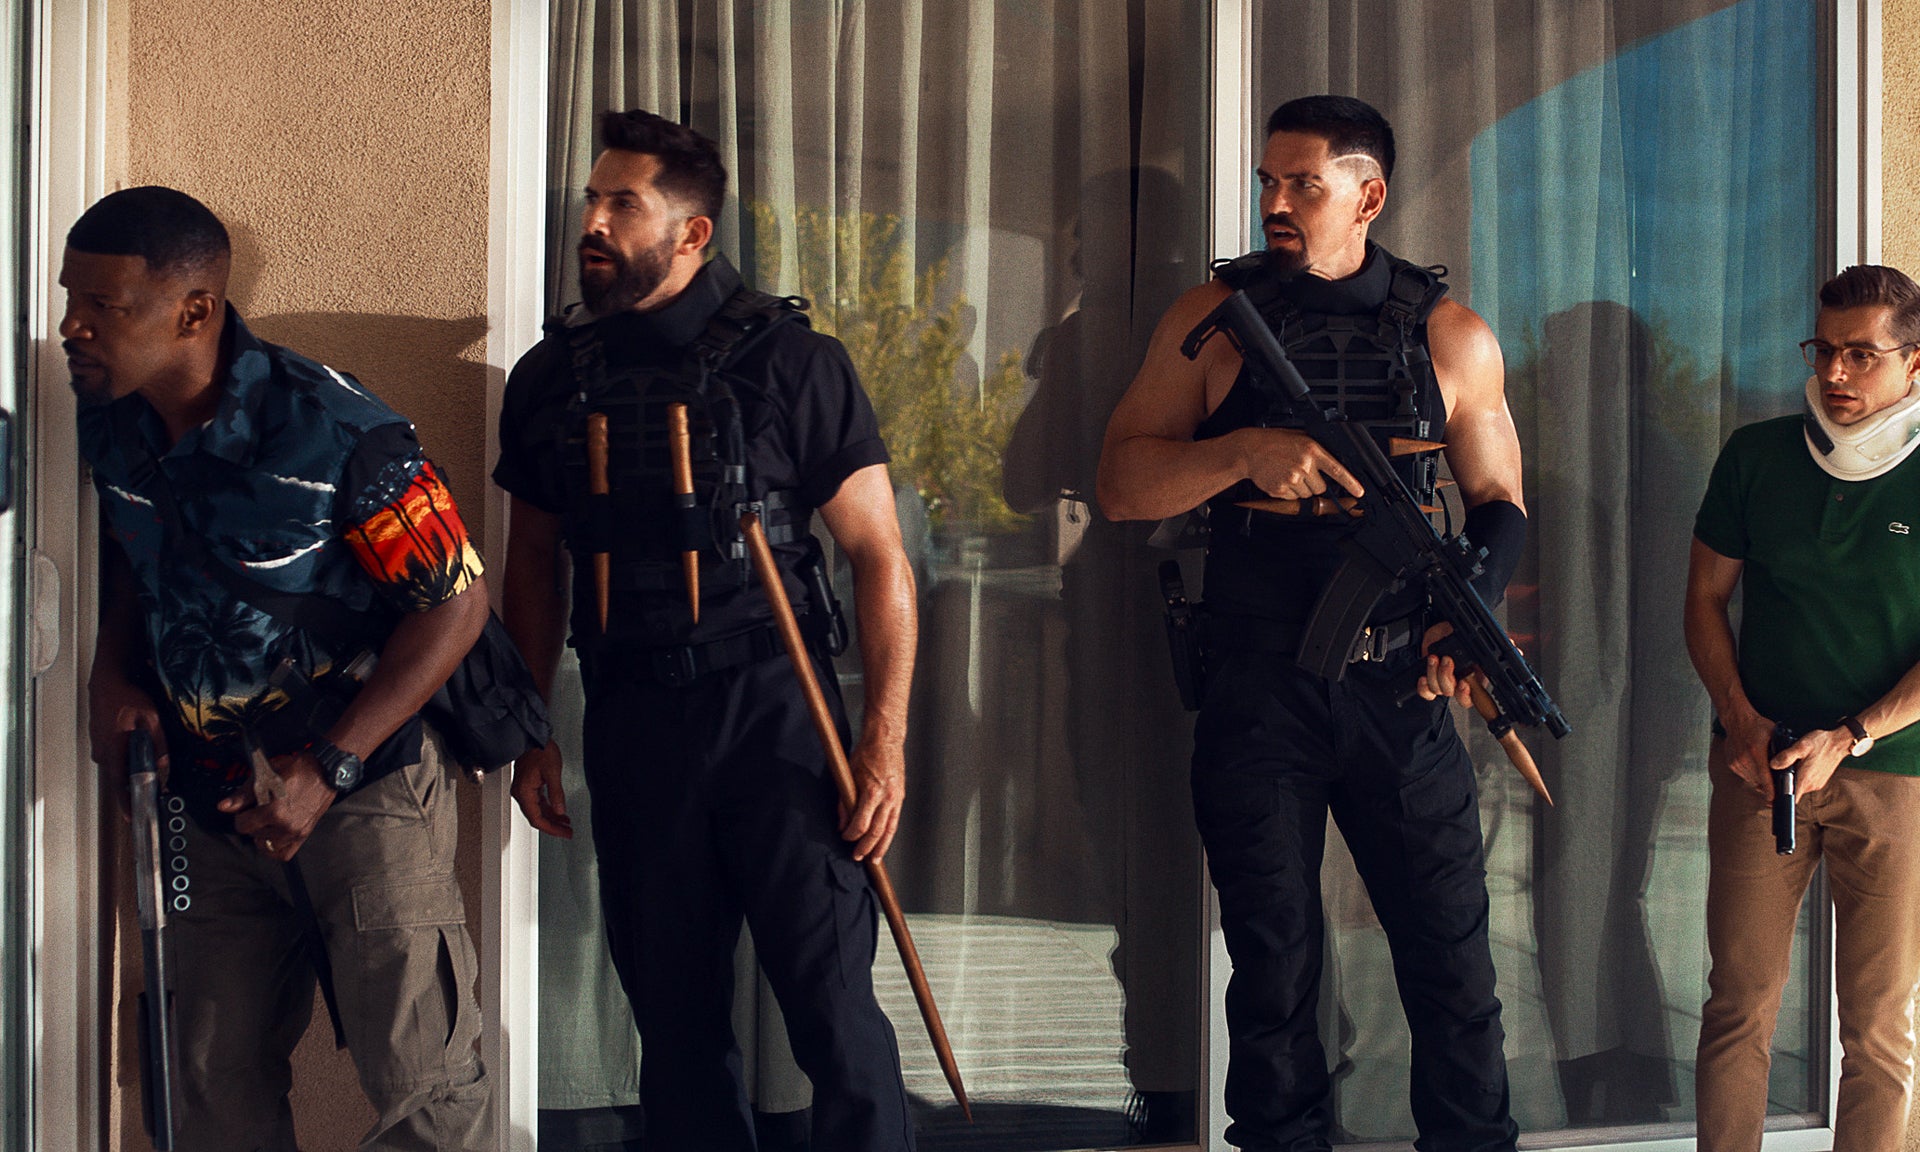 A still image of four men looking to the left, outside of an apartment, holding weapons